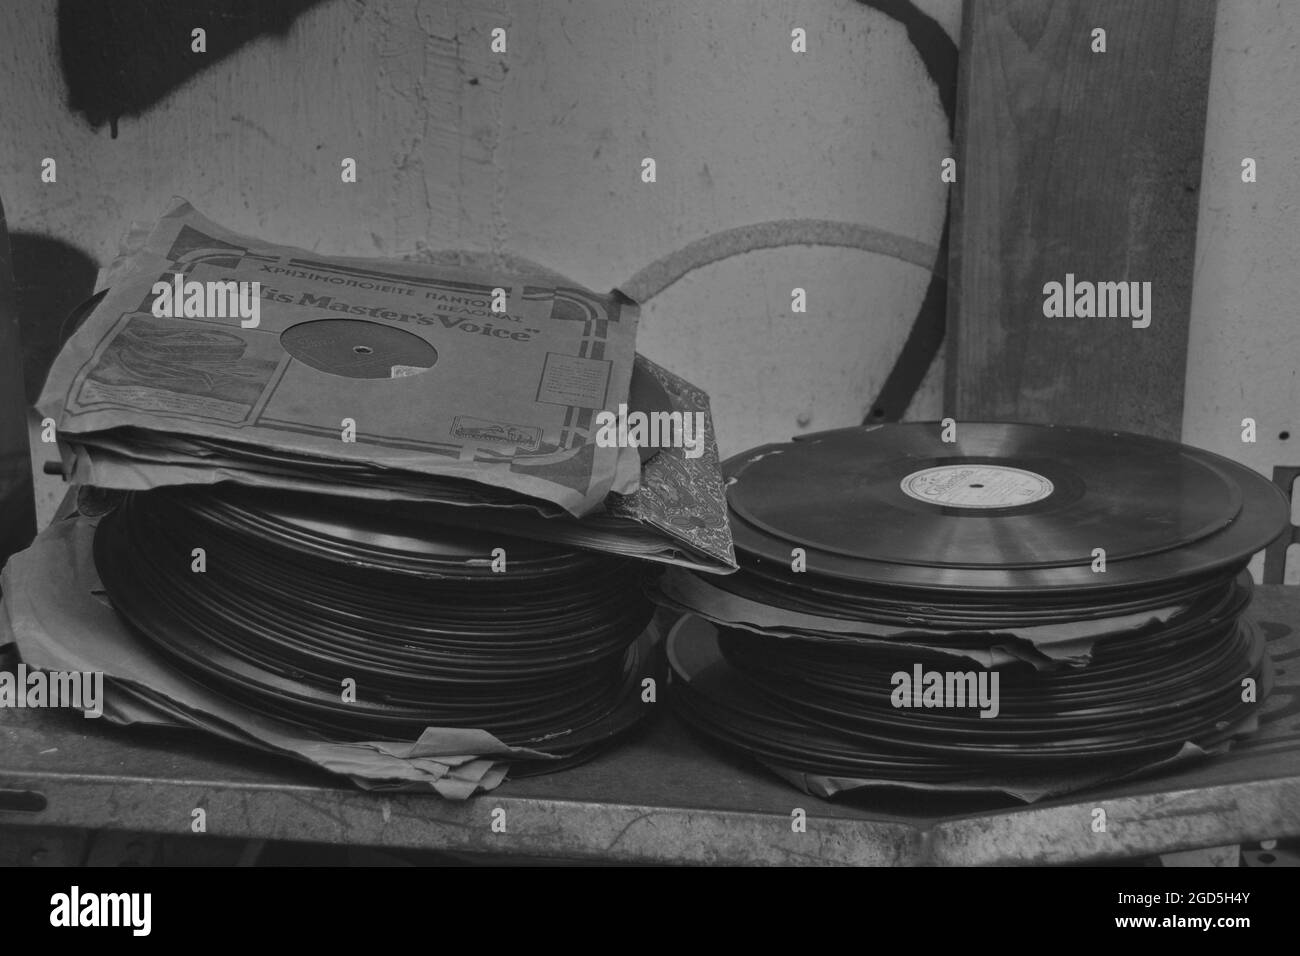 Athens, Greece - May 21, 2015: Vintage 78 rpm phonograph gramophone disc records. Old music black and white. Stock Photo